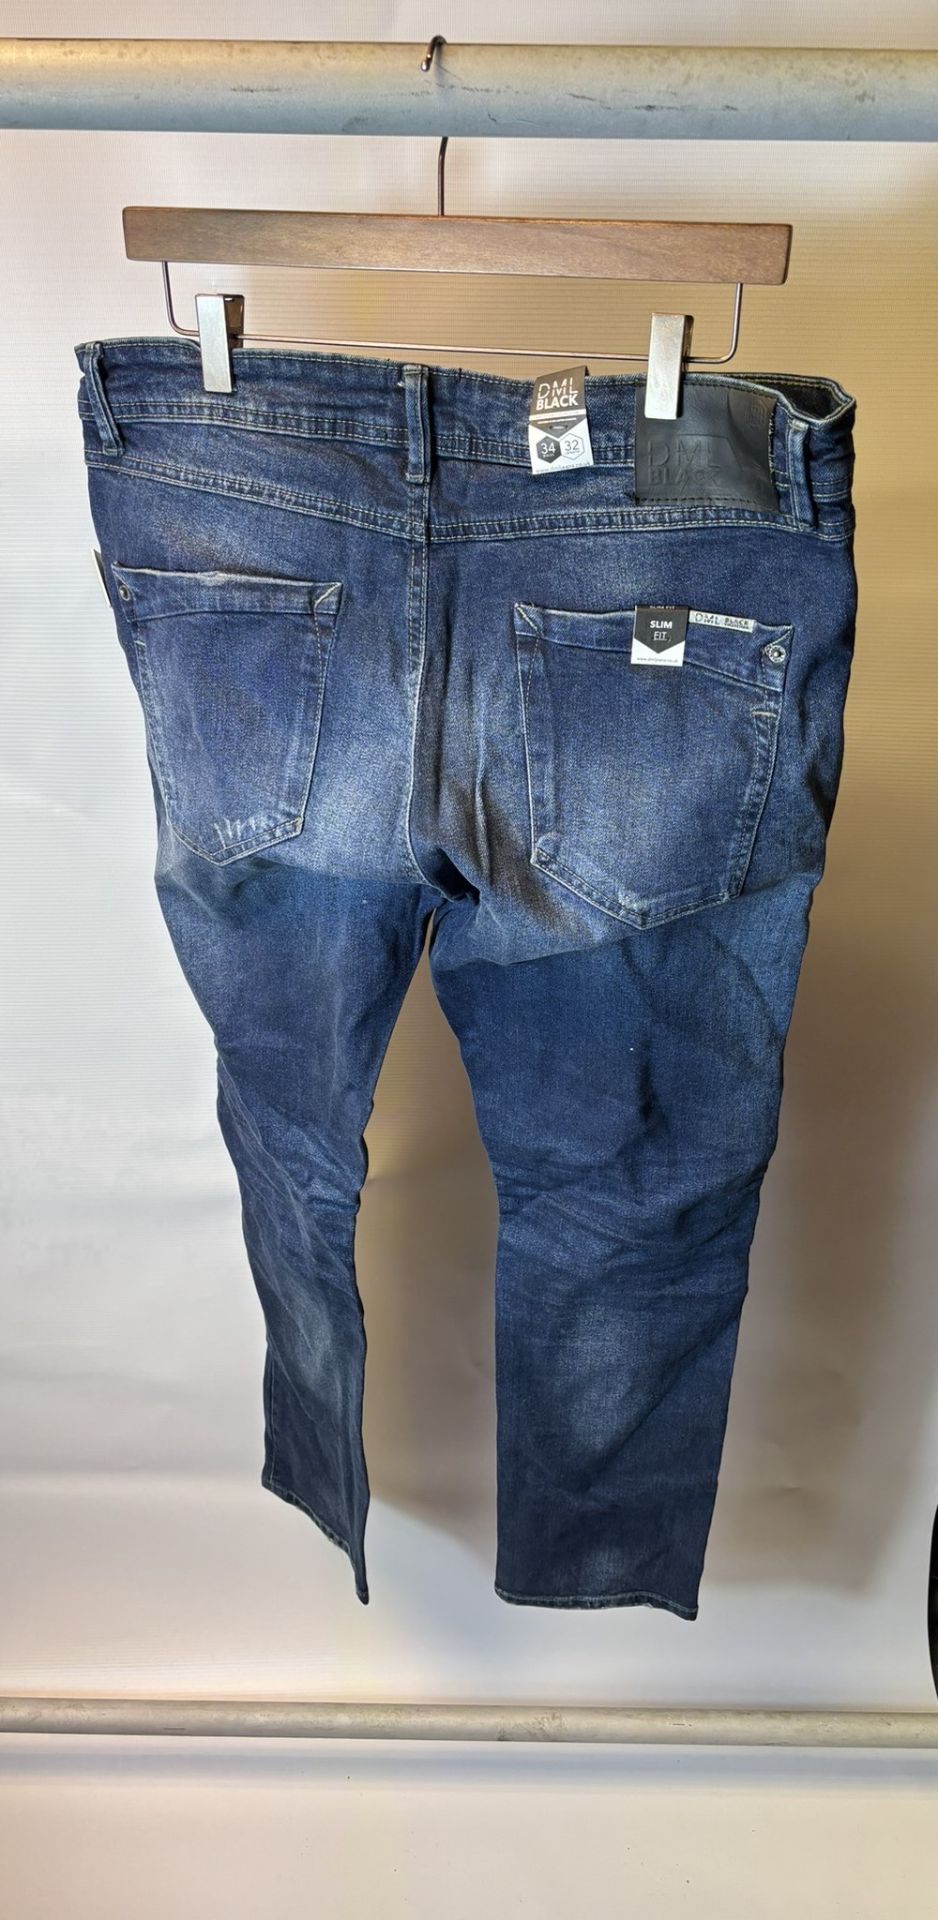 13 x Pairs Of various Sized DML Jeans Prophecy & Voyage Blue Jeans - Image 23 of 39